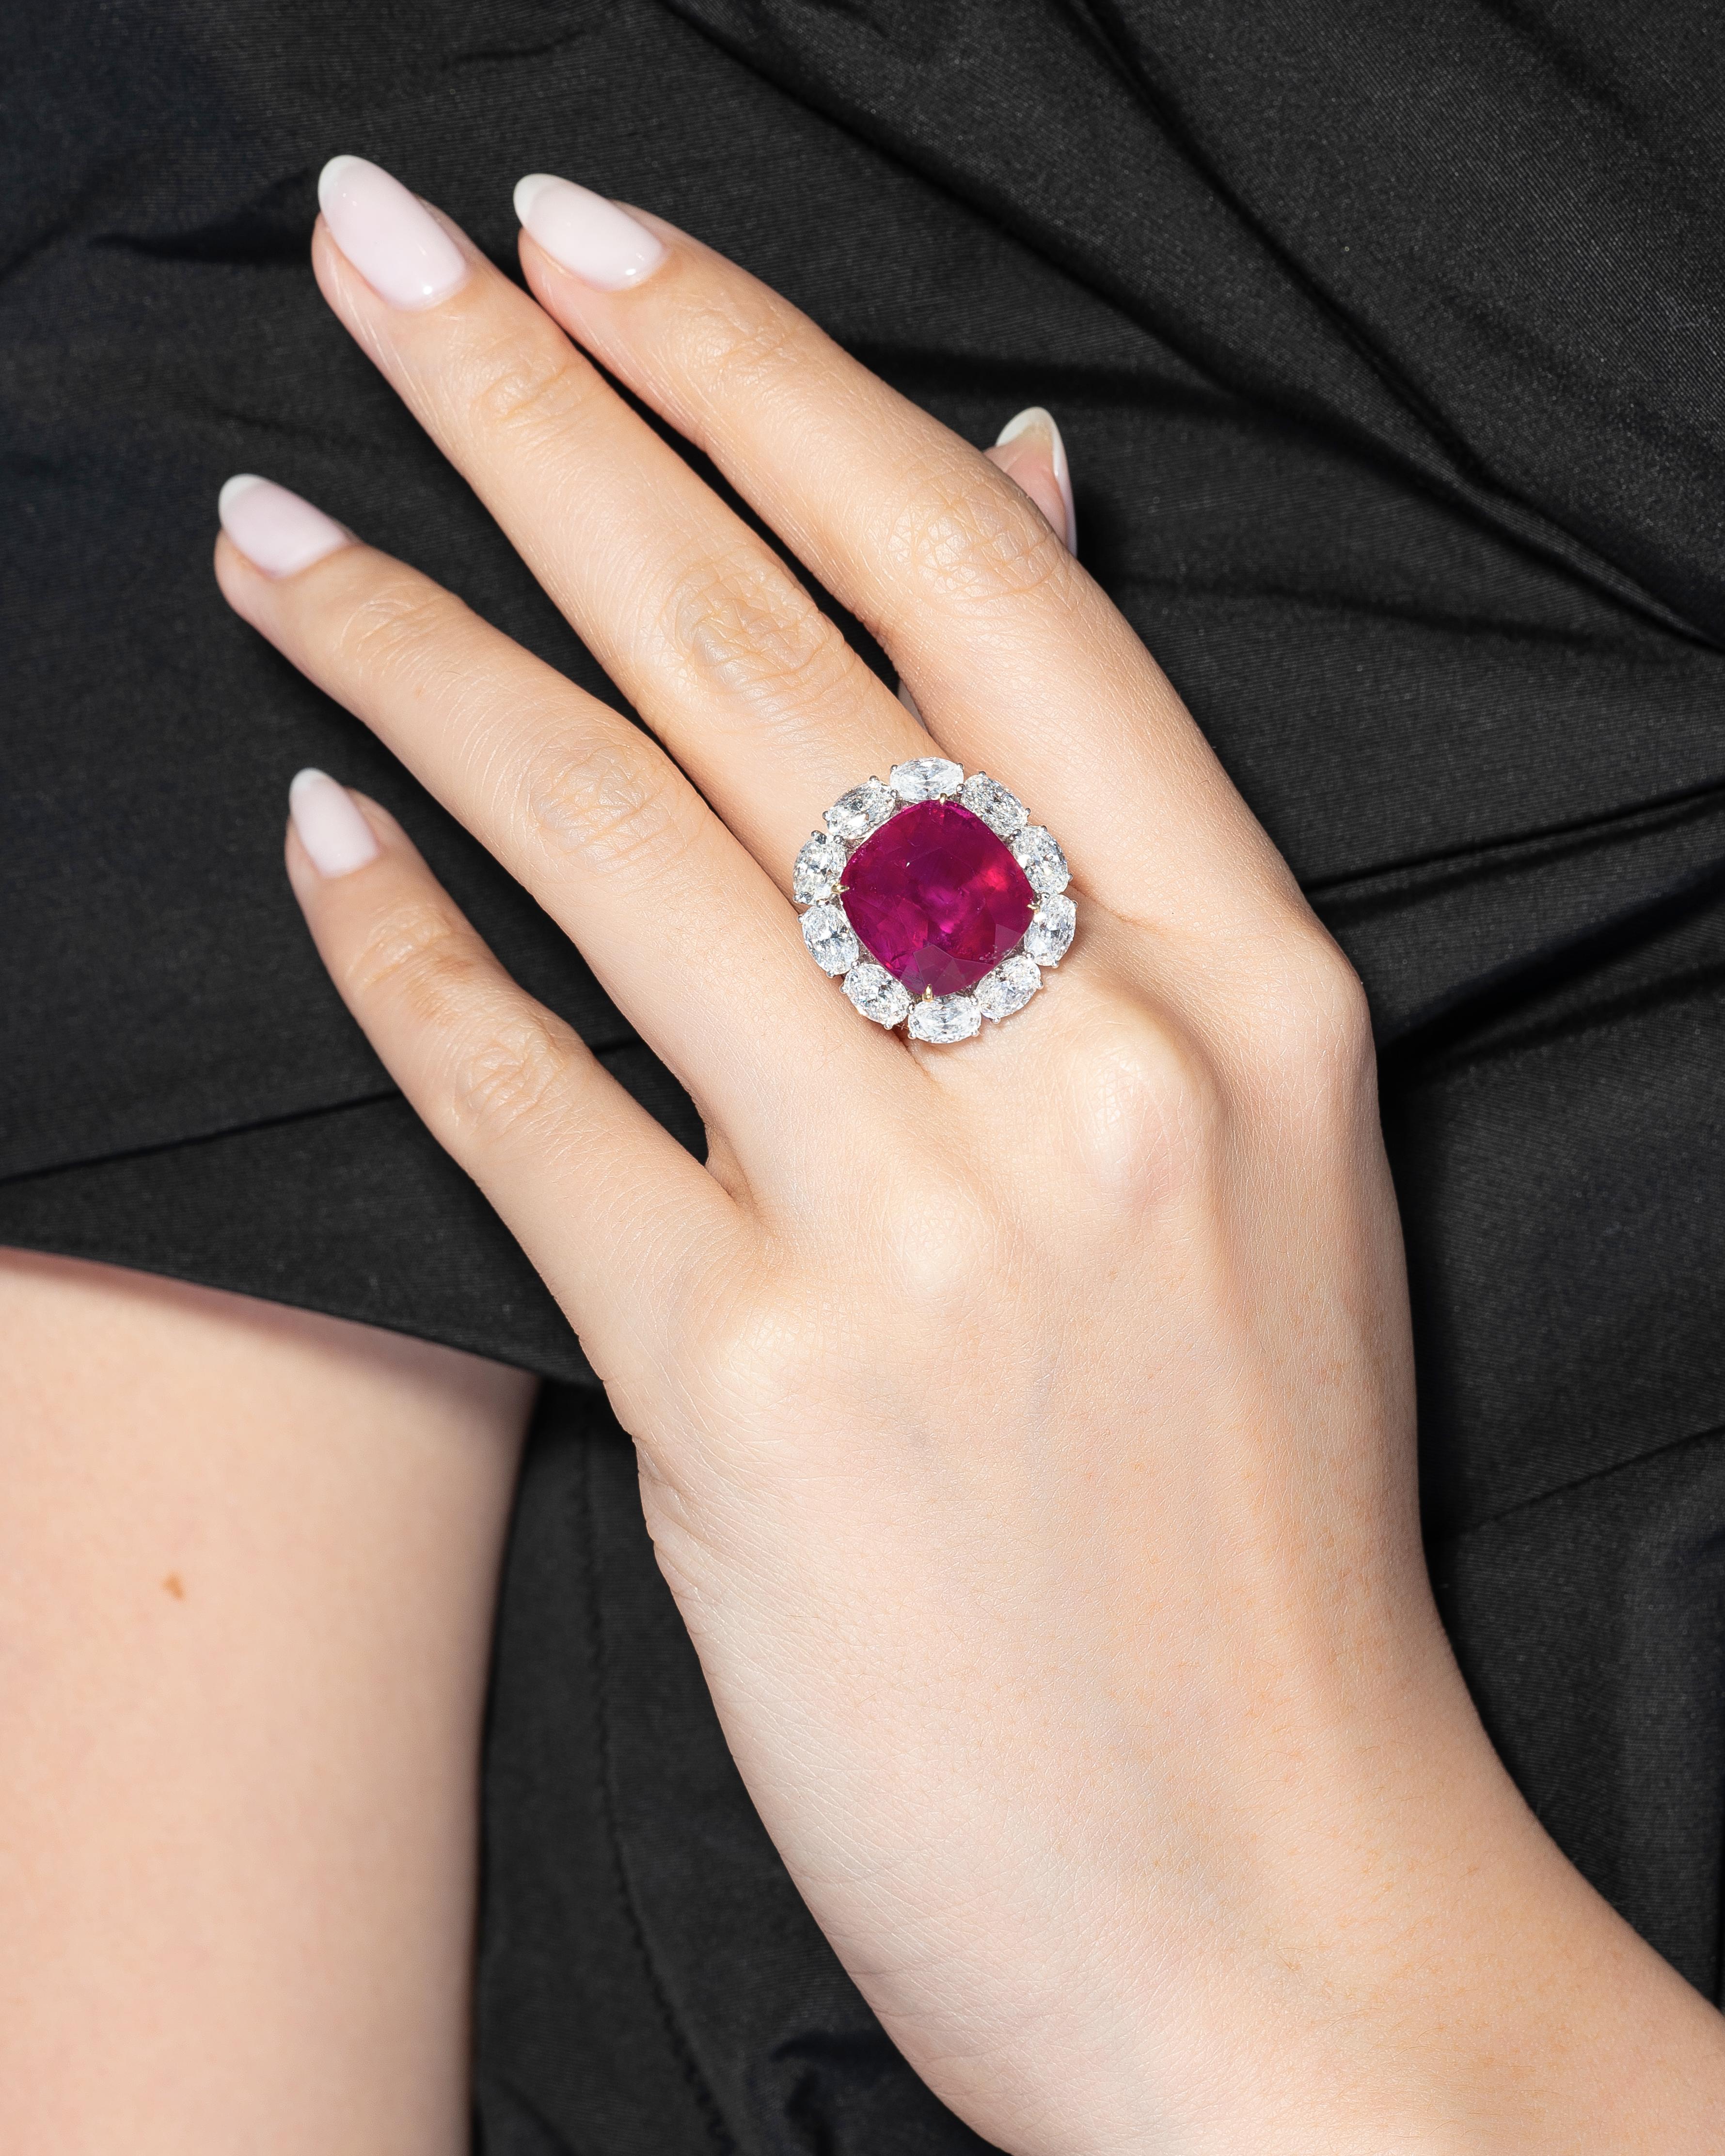 This No-Heat Burmese Ruby ring from Vihari Jewels is an absolute showstopper. The 14.25 carat cushion shaped Burmese No-Heat Ruby has been certified by Gubelin (Certificate #18027046) and makes an impactful statement. The Ruby is surrounded by 7.14